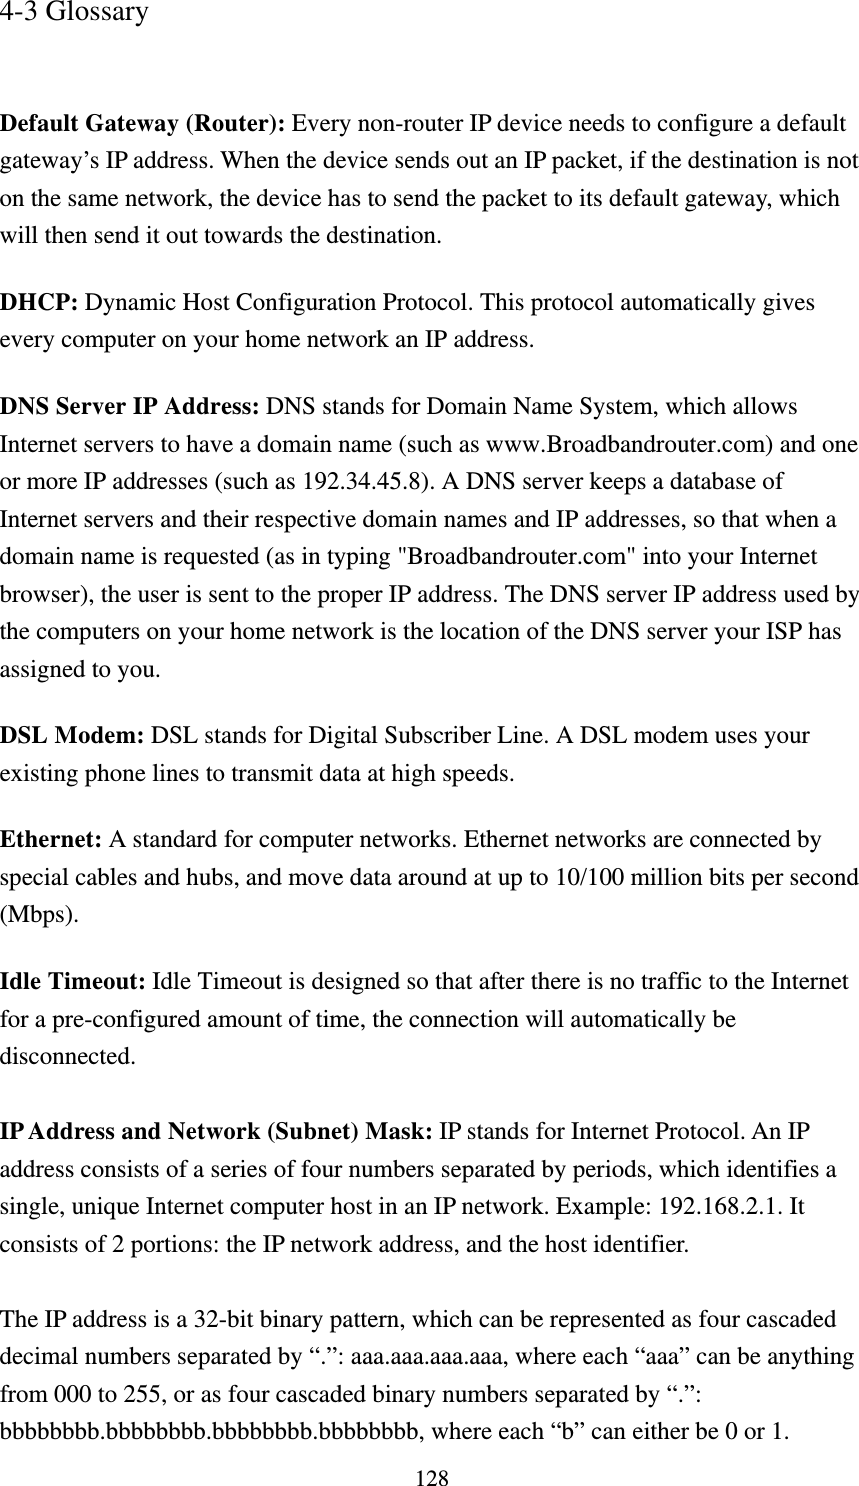 128 4-3 Glossary   Default Gateway (Router): Every non-router IP device needs to configure a default gateway’s IP address. When the device sends out an IP packet, if the destination is not on the same network, the device has to send the packet to its default gateway, which will then send it out towards the destination. DHCP: Dynamic Host Configuration Protocol. This protocol automatically gives every computer on your home network an IP address. DNS Server IP Address: DNS stands for Domain Name System, which allows Internet servers to have a domain name (such as www.Broadbandrouter.com) and one or more IP addresses (such as 192.34.45.8). A DNS server keeps a database of Internet servers and their respective domain names and IP addresses, so that when a domain name is requested (as in typing &quot;Broadbandrouter.com&quot; into your Internet browser), the user is sent to the proper IP address. The DNS server IP address used by the computers on your home network is the location of the DNS server your ISP has assigned to you.   DSL Modem: DSL stands for Digital Subscriber Line. A DSL modem uses your existing phone lines to transmit data at high speeds.   Ethernet: A standard for computer networks. Ethernet networks are connected by special cables and hubs, and move data around at up to 10/100 million bits per second (Mbps).  Idle Timeout: Idle Timeout is designed so that after there is no traffic to the Internet for a pre-configured amount of time, the connection will automatically be disconnected.  IP Address and Network (Subnet) Mask: IP stands for Internet Protocol. An IP address consists of a series of four numbers separated by periods, which identifies a single, unique Internet computer host in an IP network. Example: 192.168.2.1. It consists of 2 portions: the IP network address, and the host identifier.  The IP address is a 32-bit binary pattern, which can be represented as four cascaded decimal numbers separated by “.”: aaa.aaa.aaa.aaa, where each “aaa” can be anything from 000 to 255, or as four cascaded binary numbers separated by “.”: bbbbbbbb.bbbbbbbb.bbbbbbbb.bbbbbbbb, where each “b” can either be 0 or 1. 